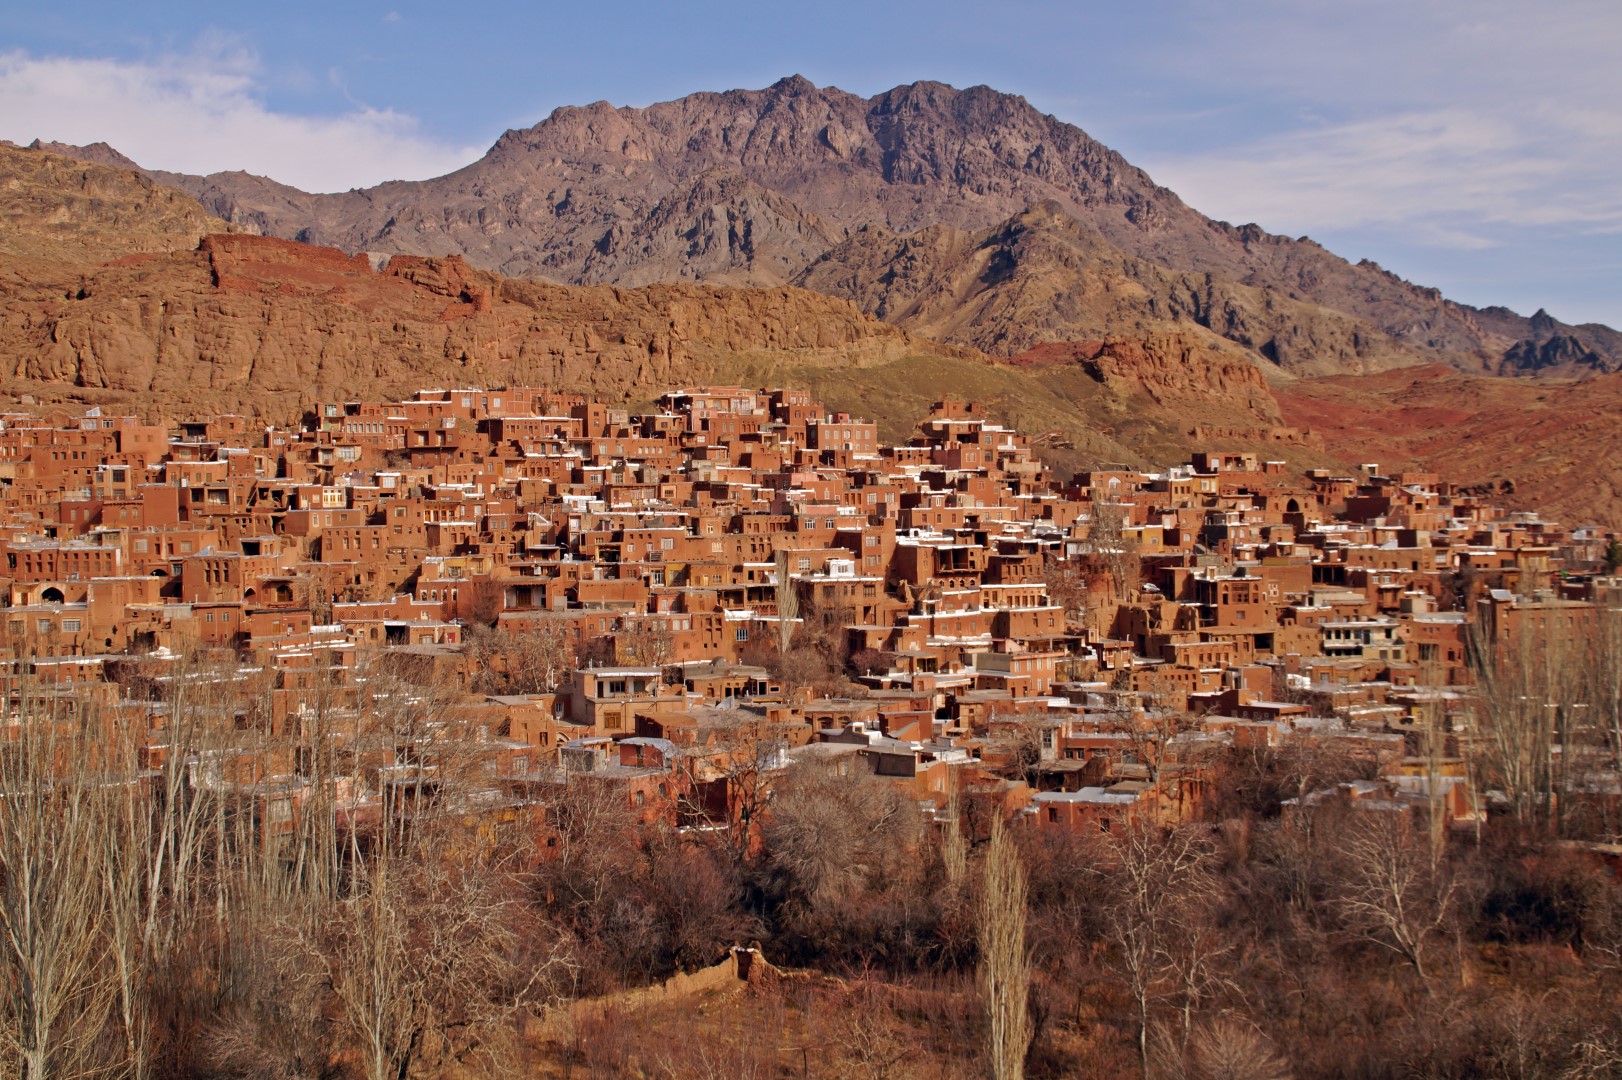 The spectacular red village of Abyaneh - one of my favourite places in Iran